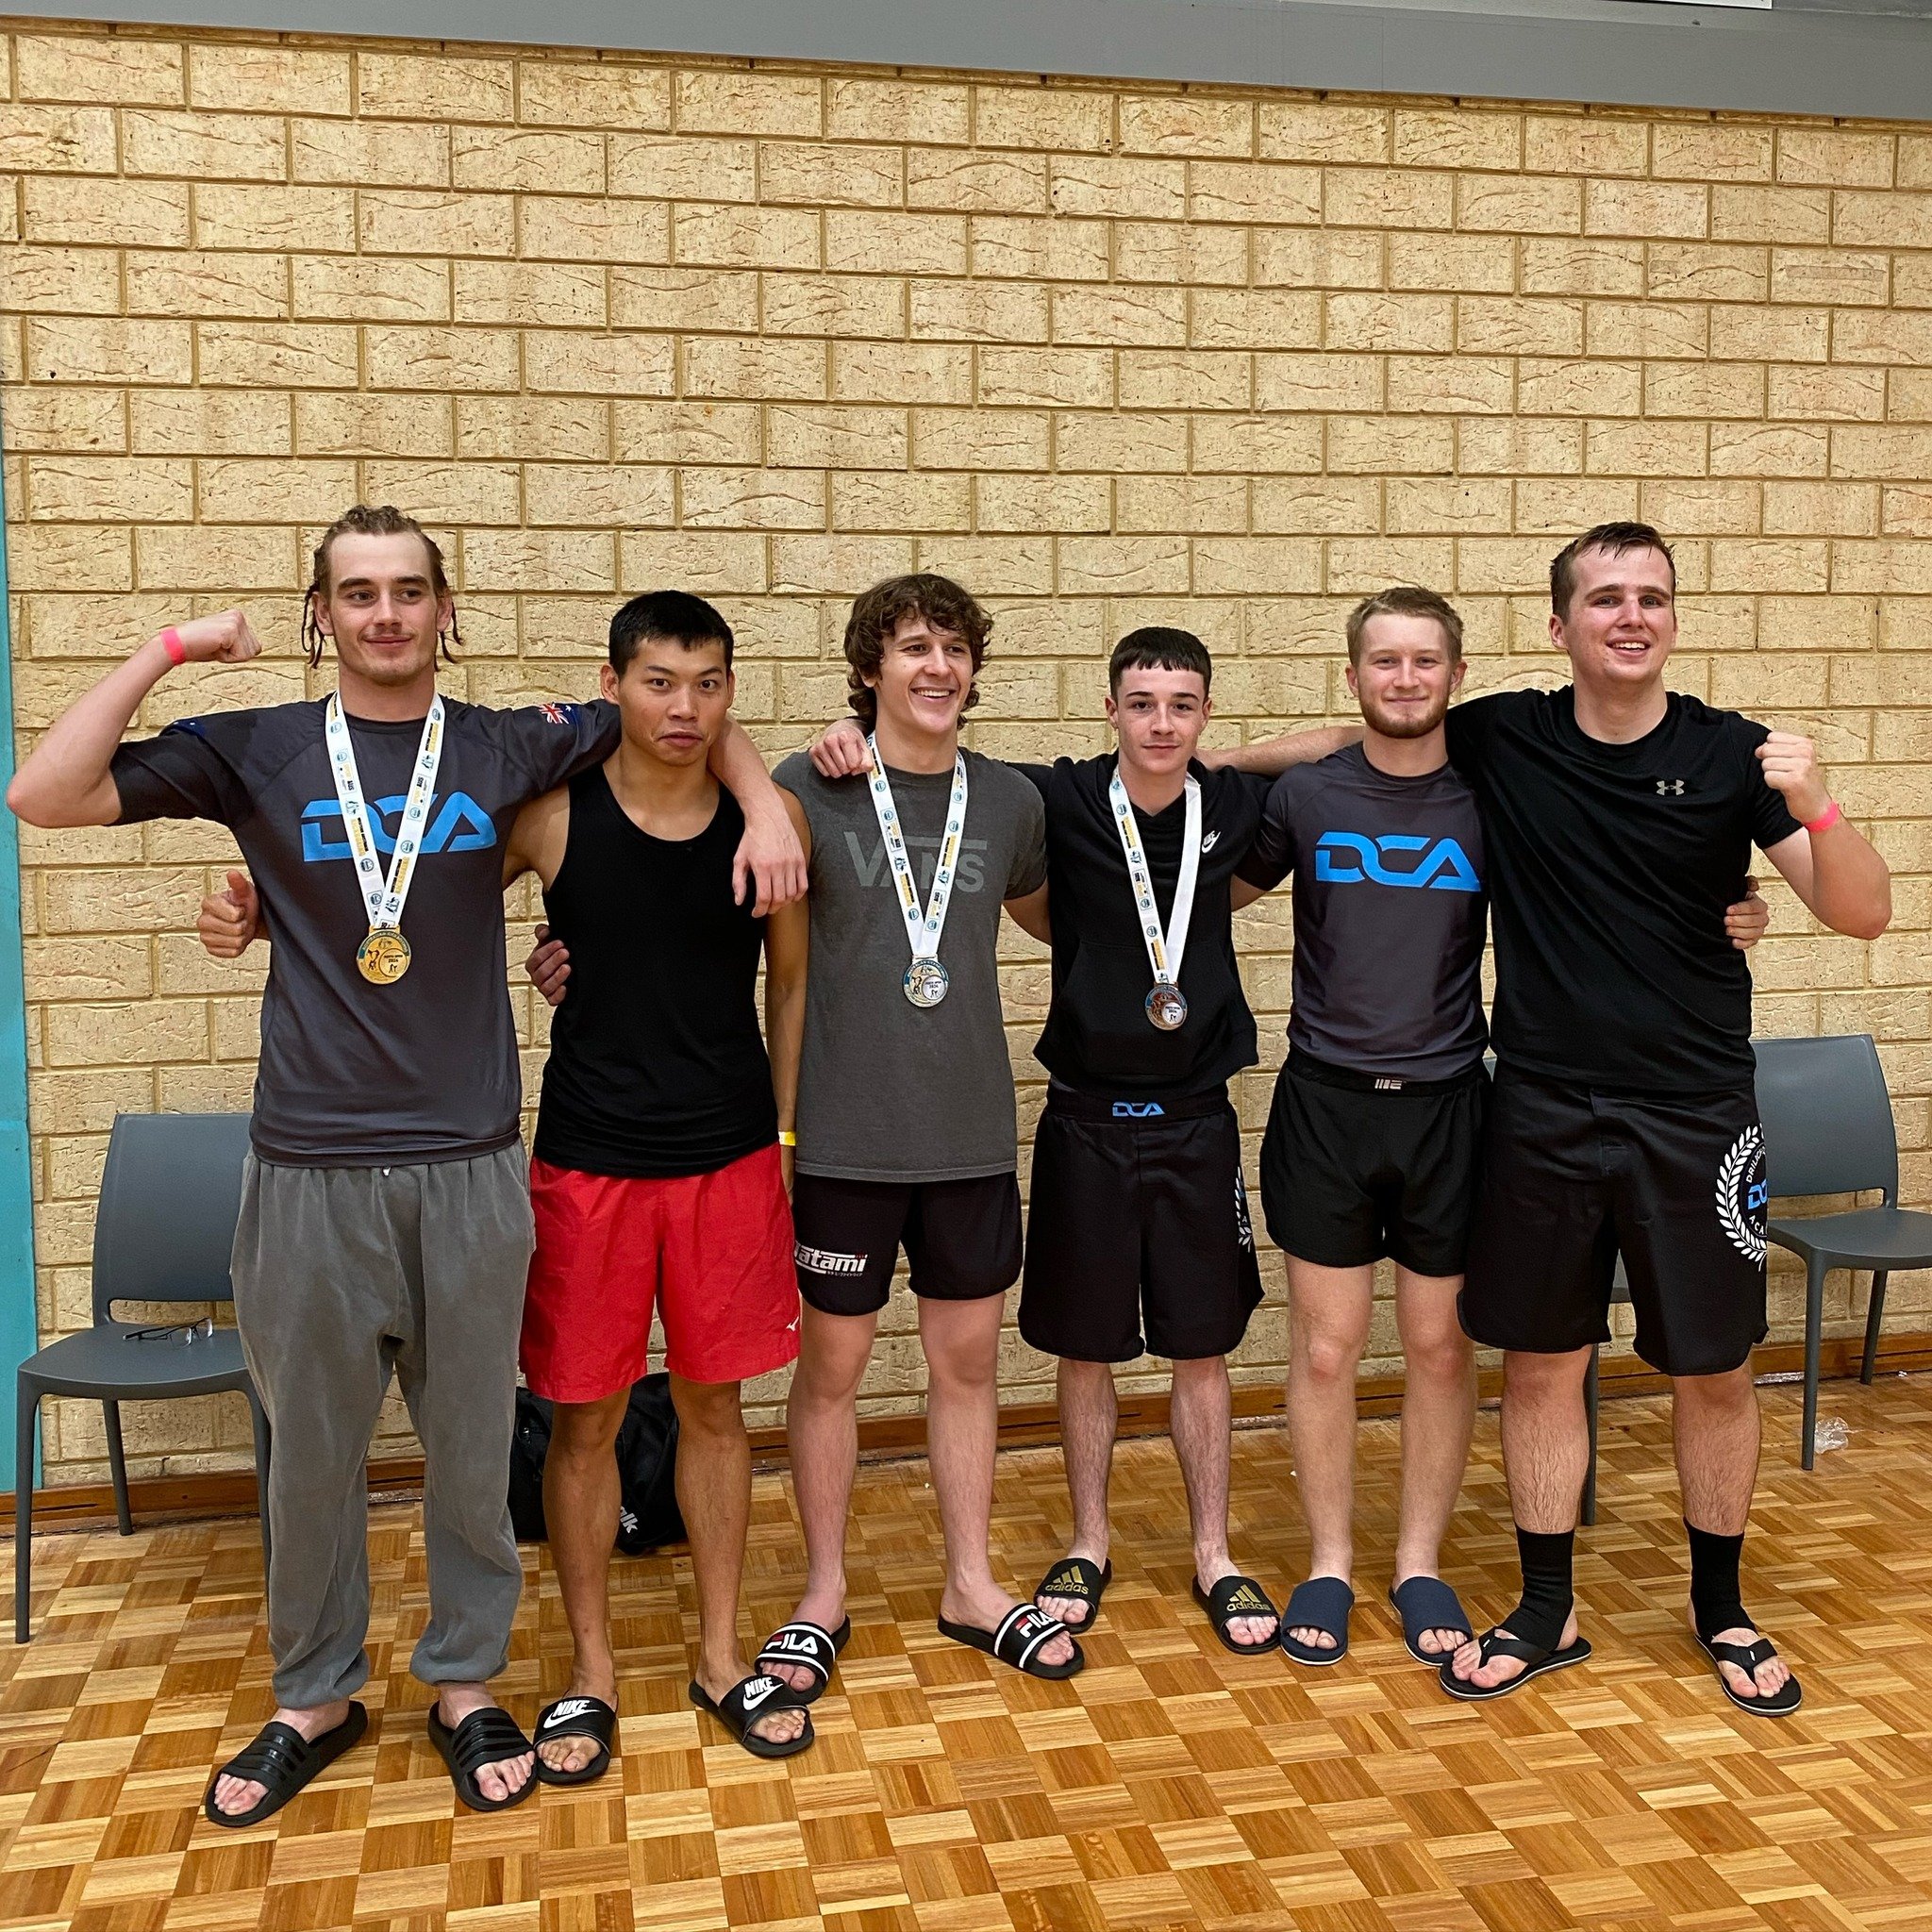 Well done to all the team on the weekend at the WAKO kickboxing tournament, some solid matches and wins! Great job to the competitors jumping in for their first time 🚀🫡🔥🏆

www.drilichcombatacademy.com 

#kickboxinglife #kickboxingtraining #mma #d